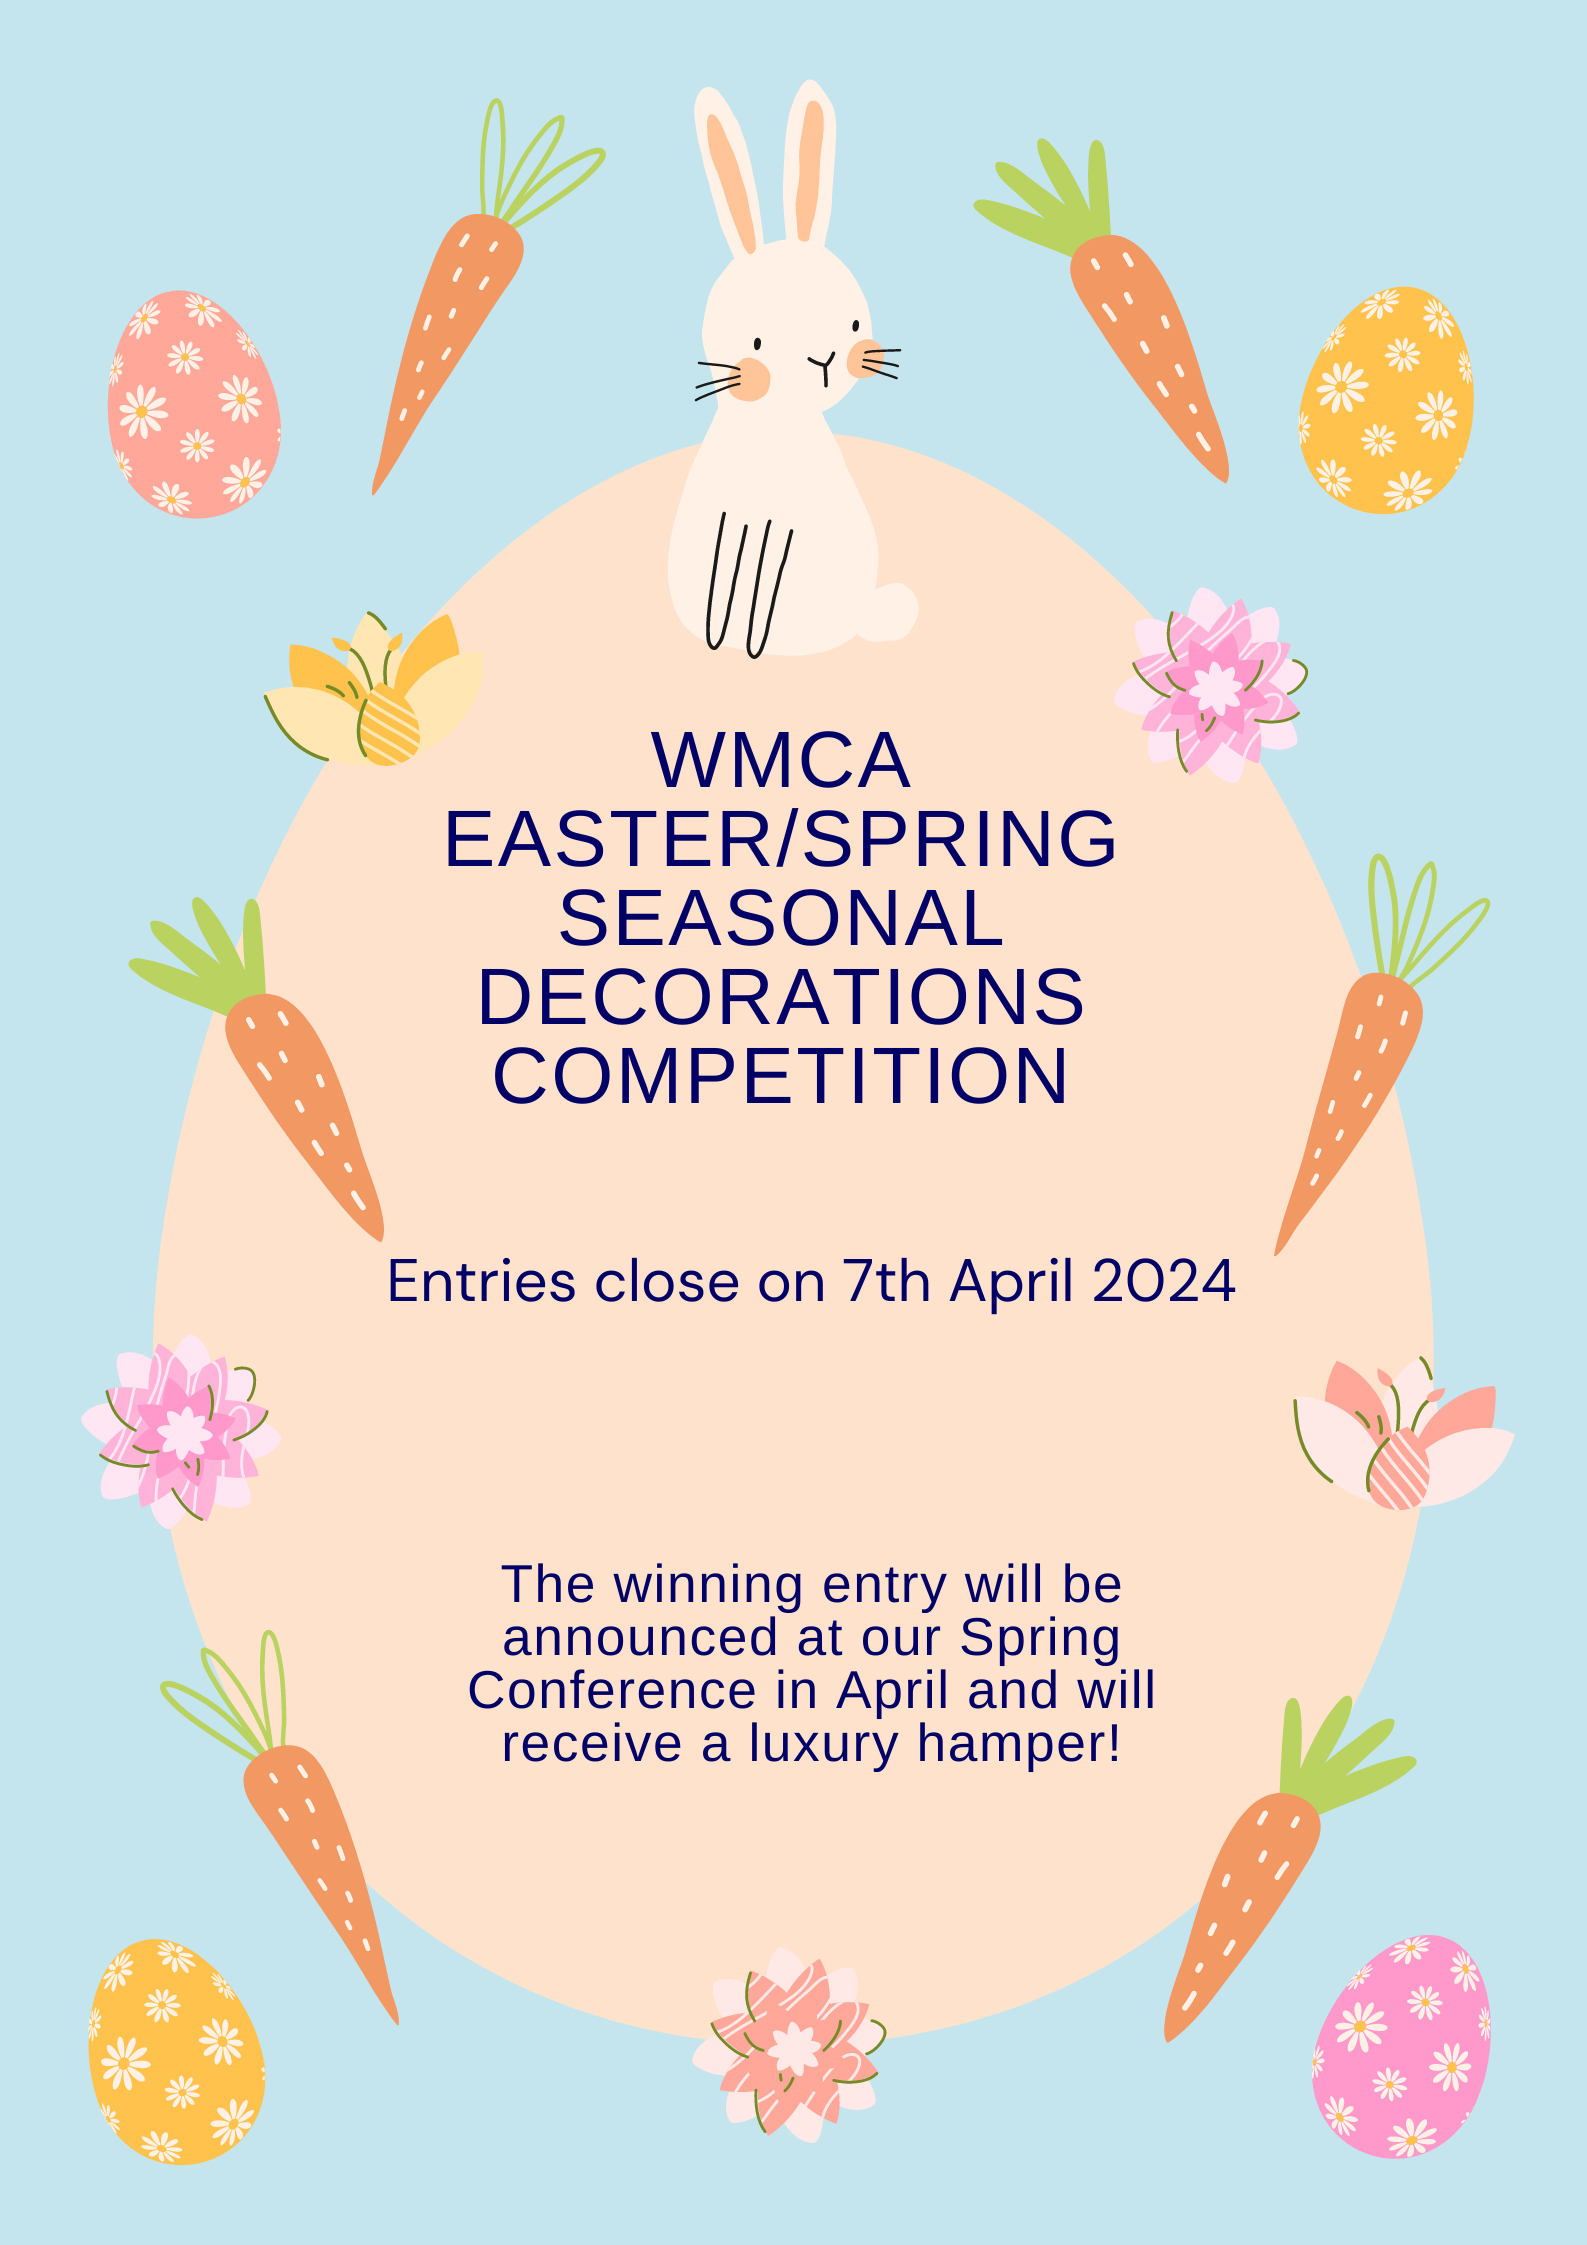 https://stratus.campaign-image.eu/images/32883000015418004_zc_v1_1709741483198_spring_decorations_competition_(2).png